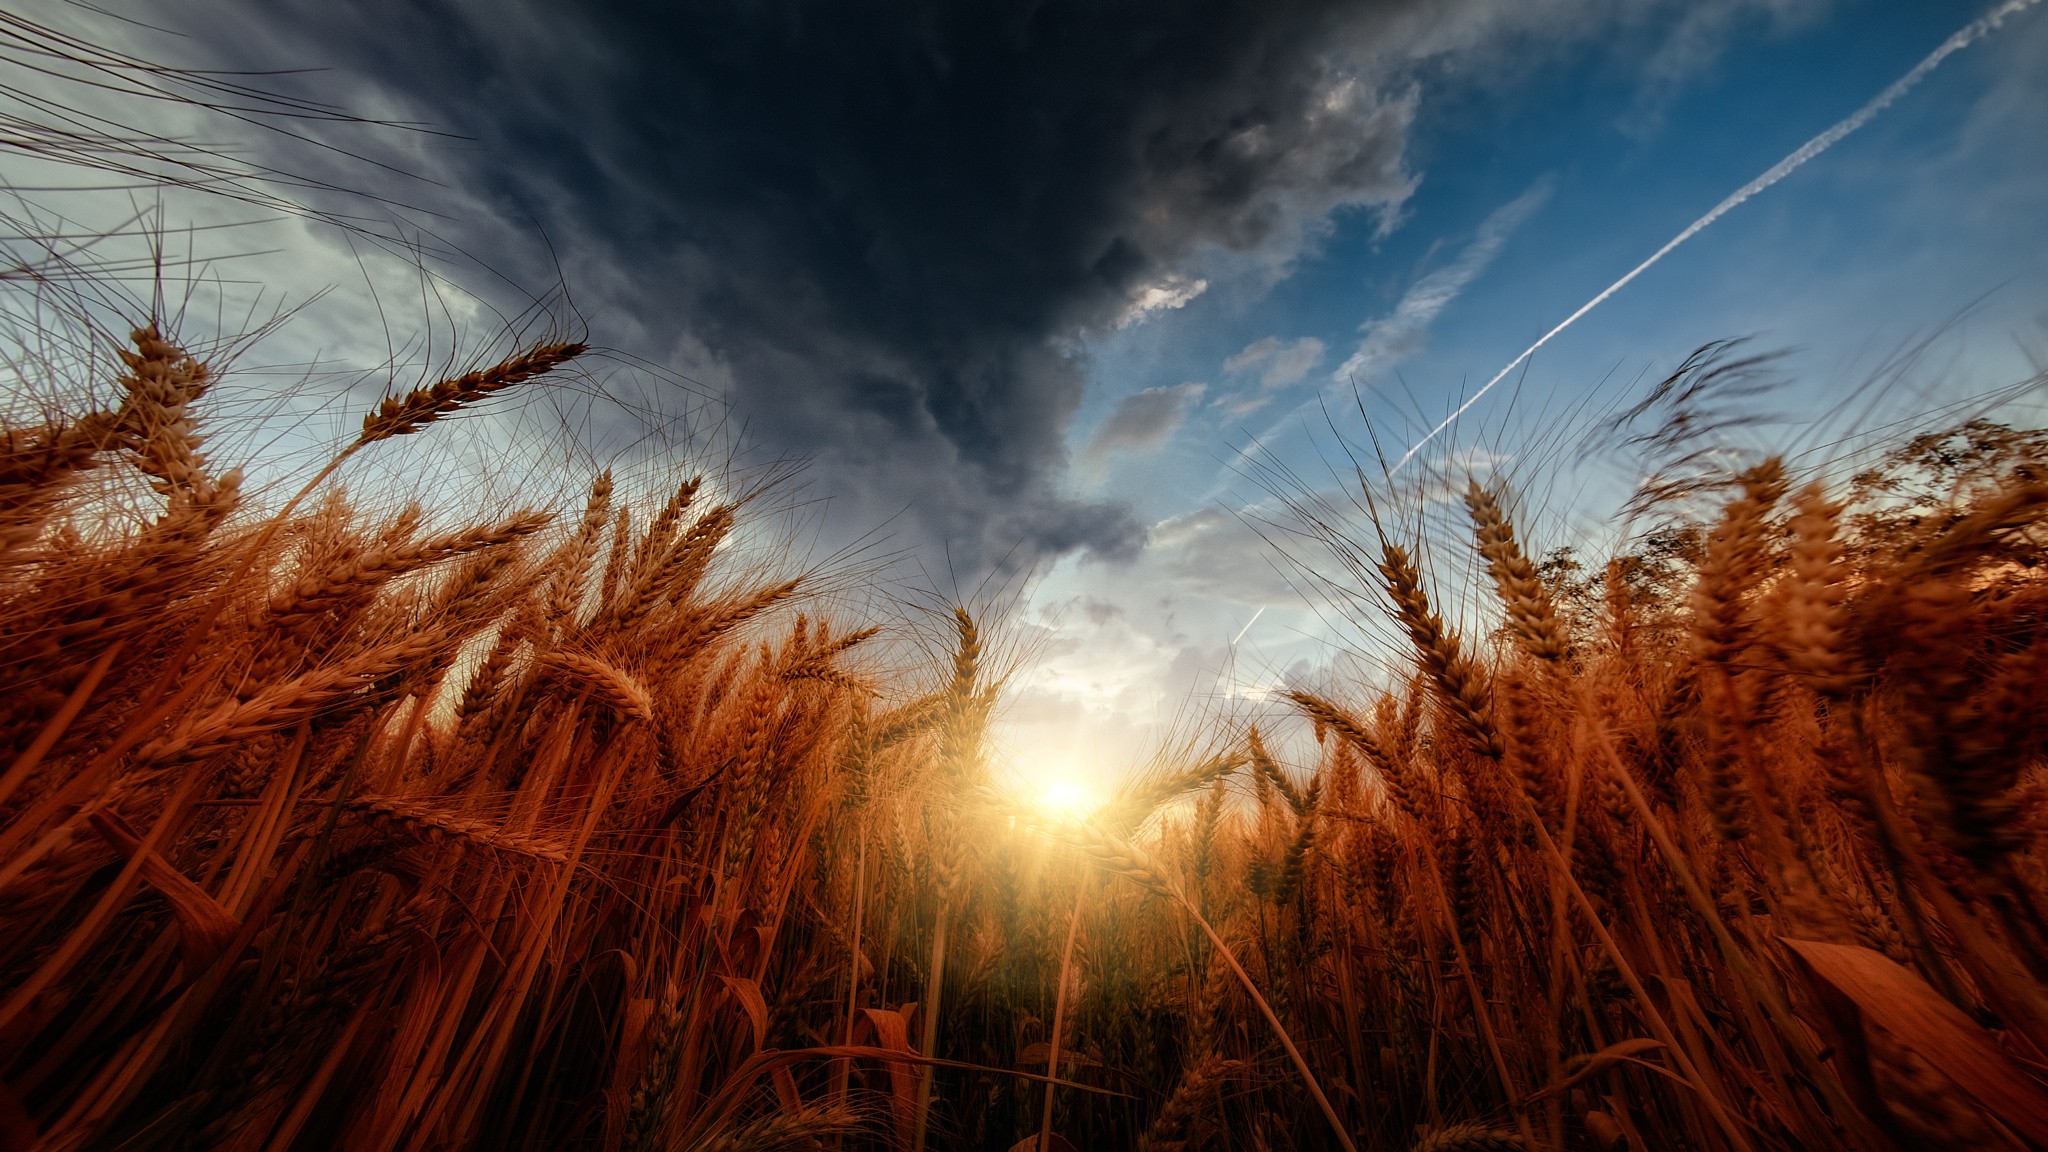 nature, Sky, Wheat, Storm, Sunset, Clouds, Colorful Wallpaper